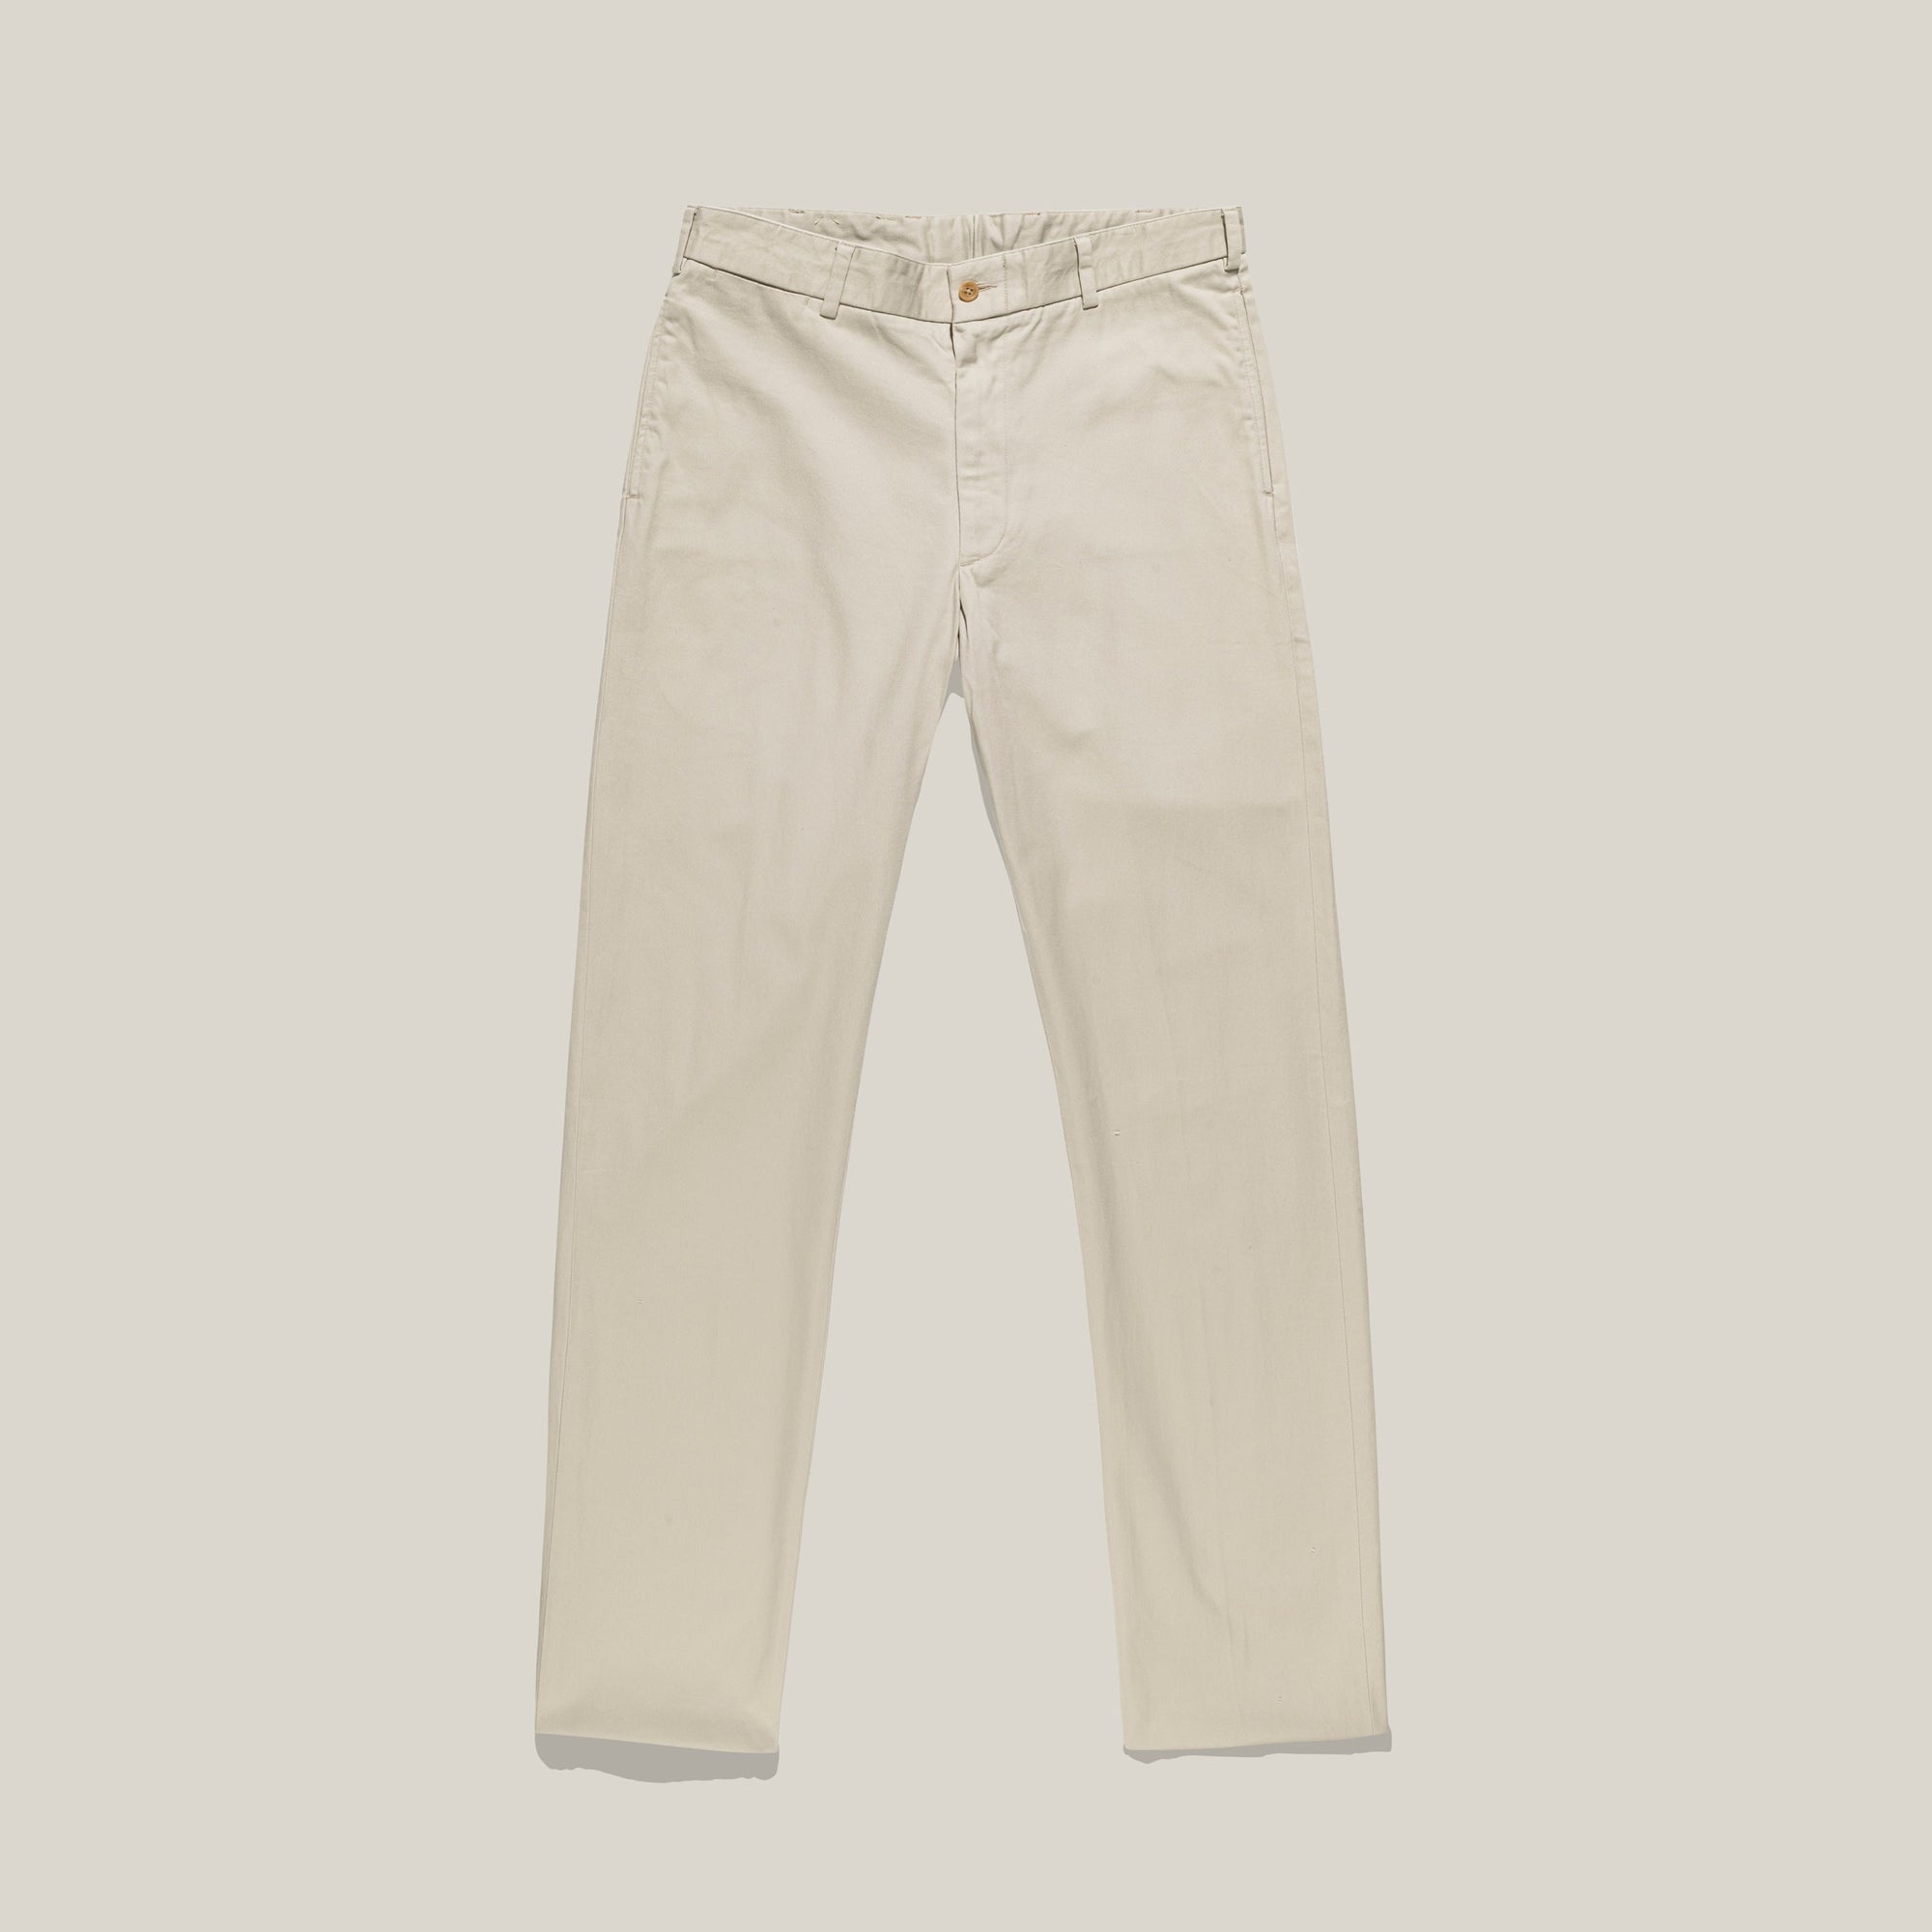 M1 Relaxed Fit Original Twills in Cement by Bills Khakis